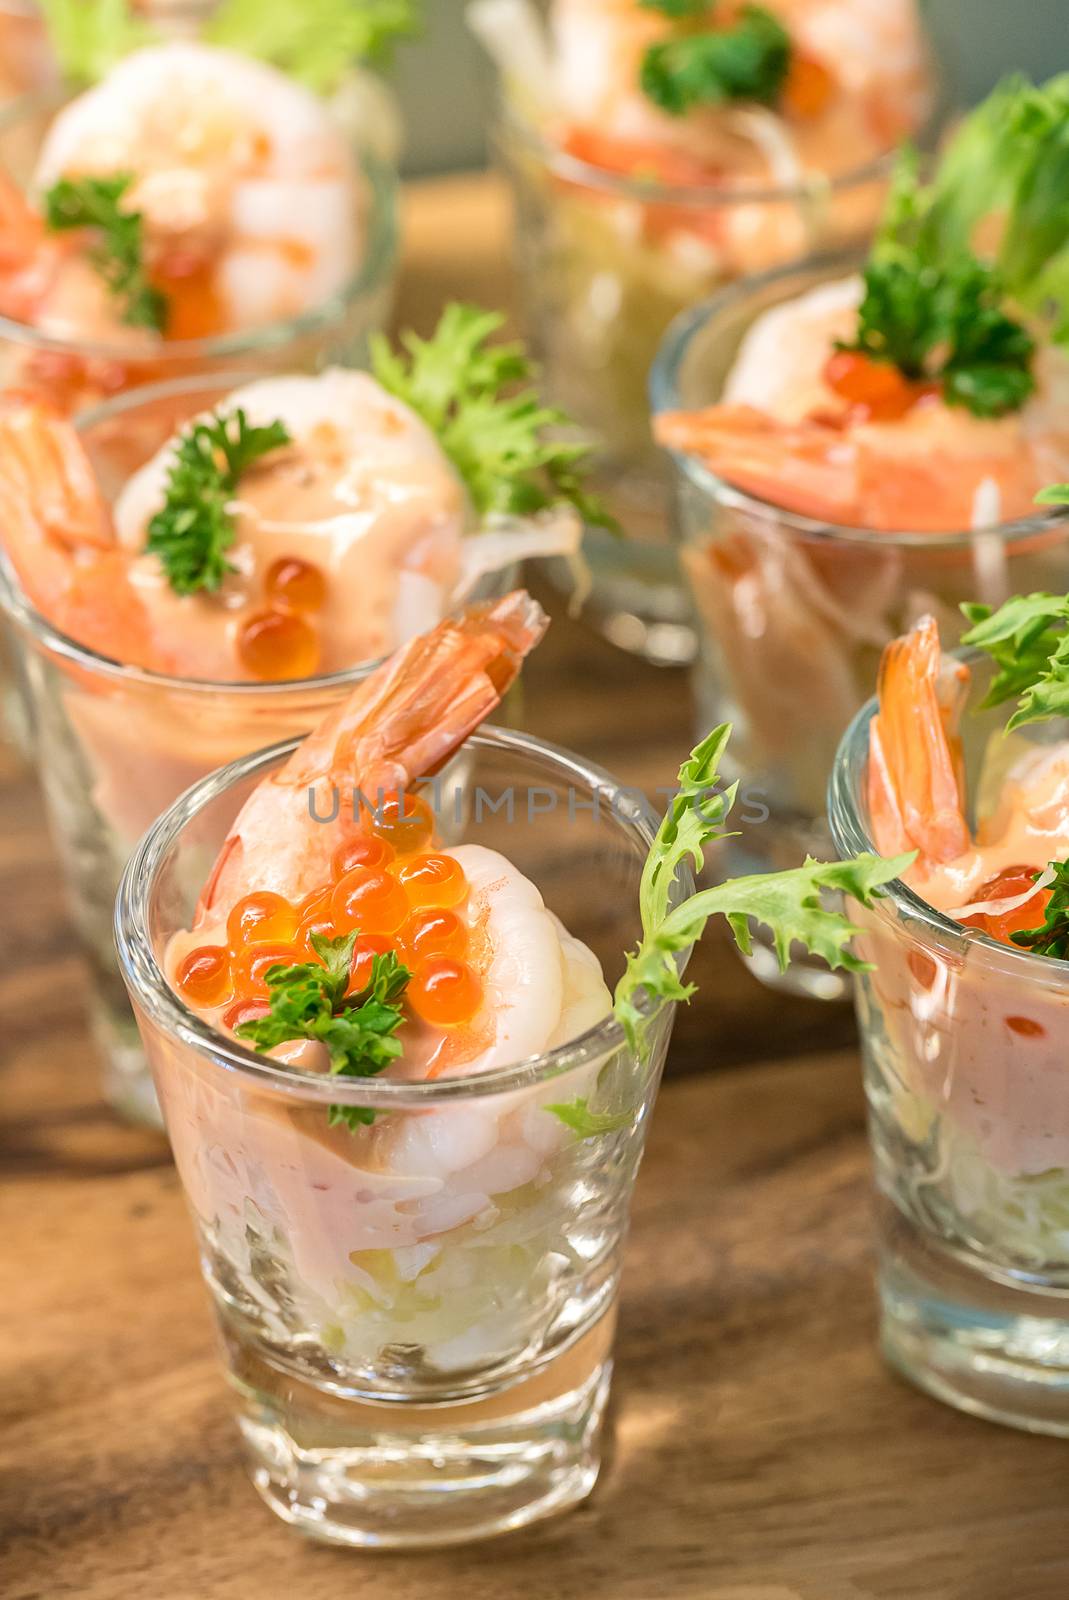 Shrimp Cocktail and egg in glass